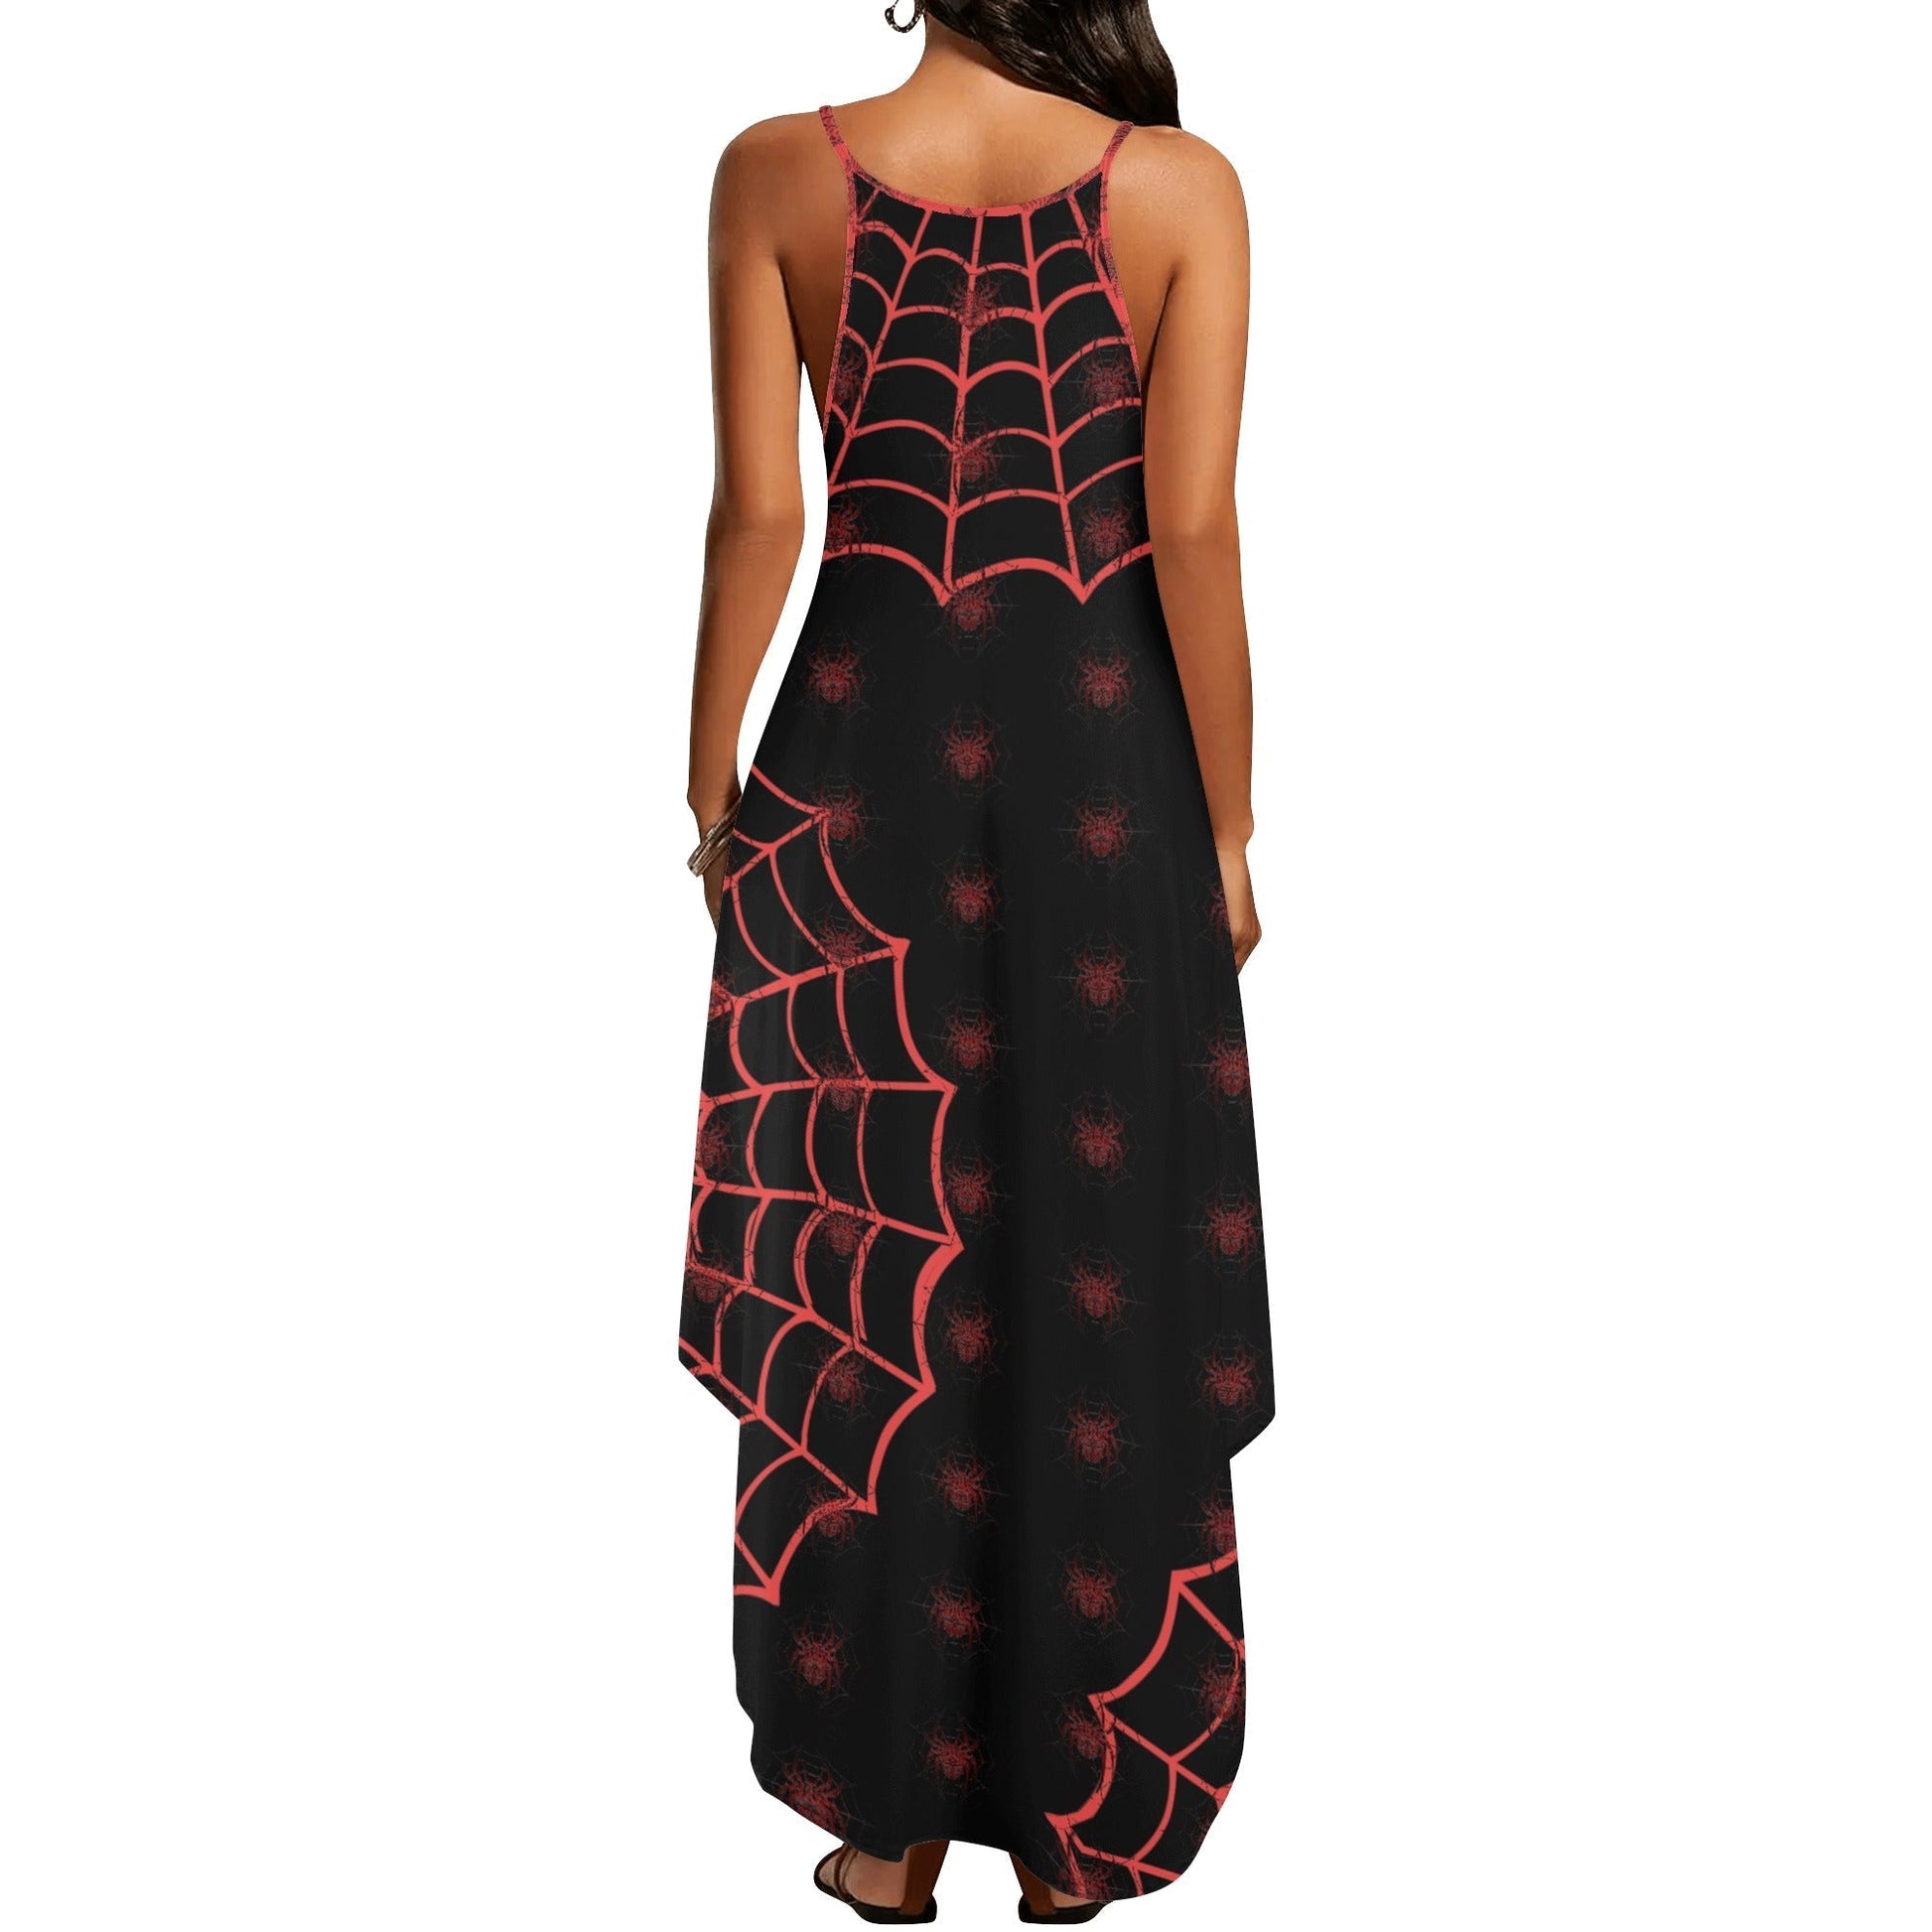 Stand out  with the  Spider Queen Womens Elegant Sleeveless Party Dress  available at Hey Nugget. Grab yours today!